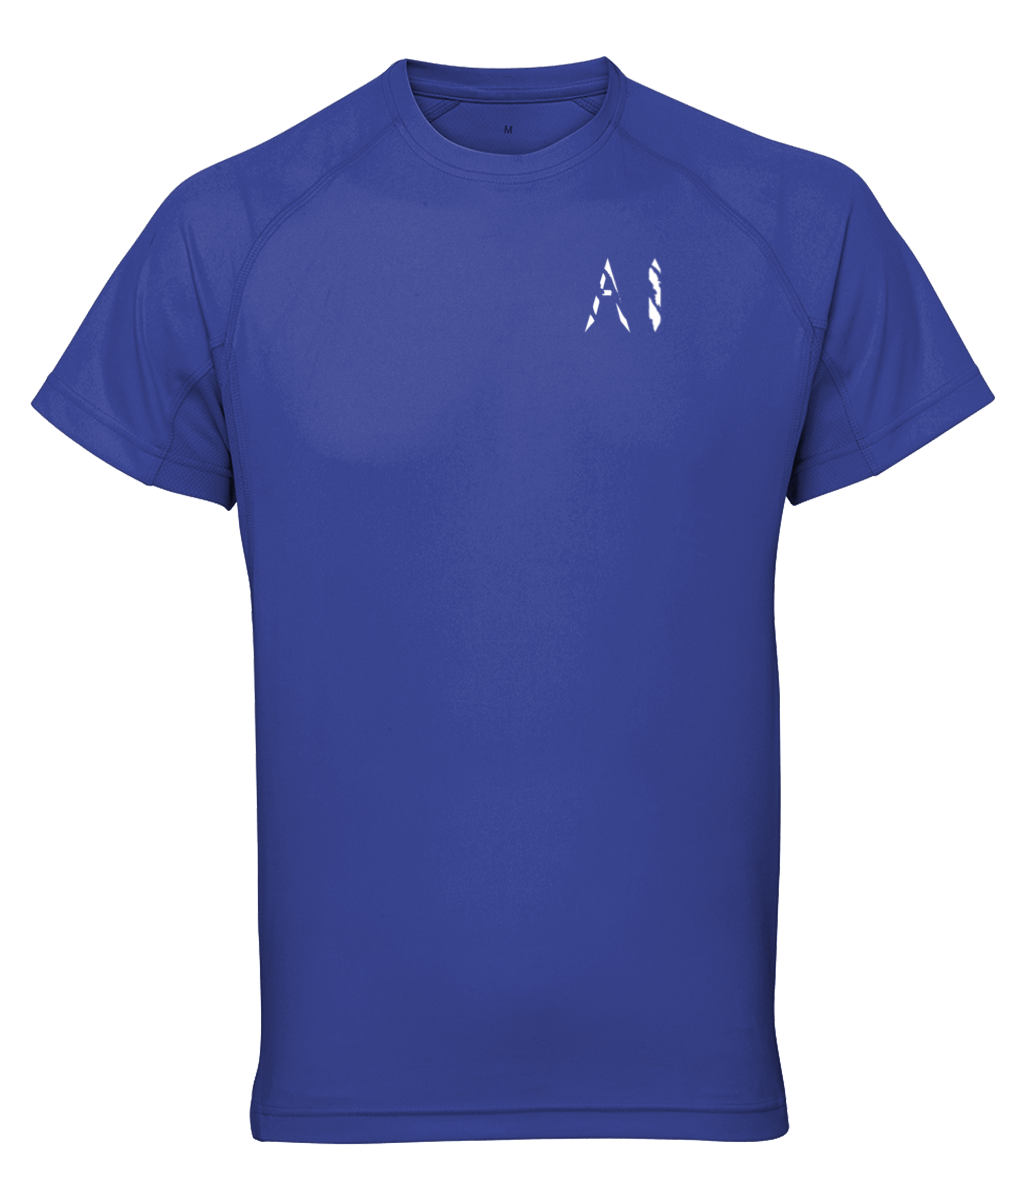 Womens blue Athletic Performance Top with White AI logo on left breast